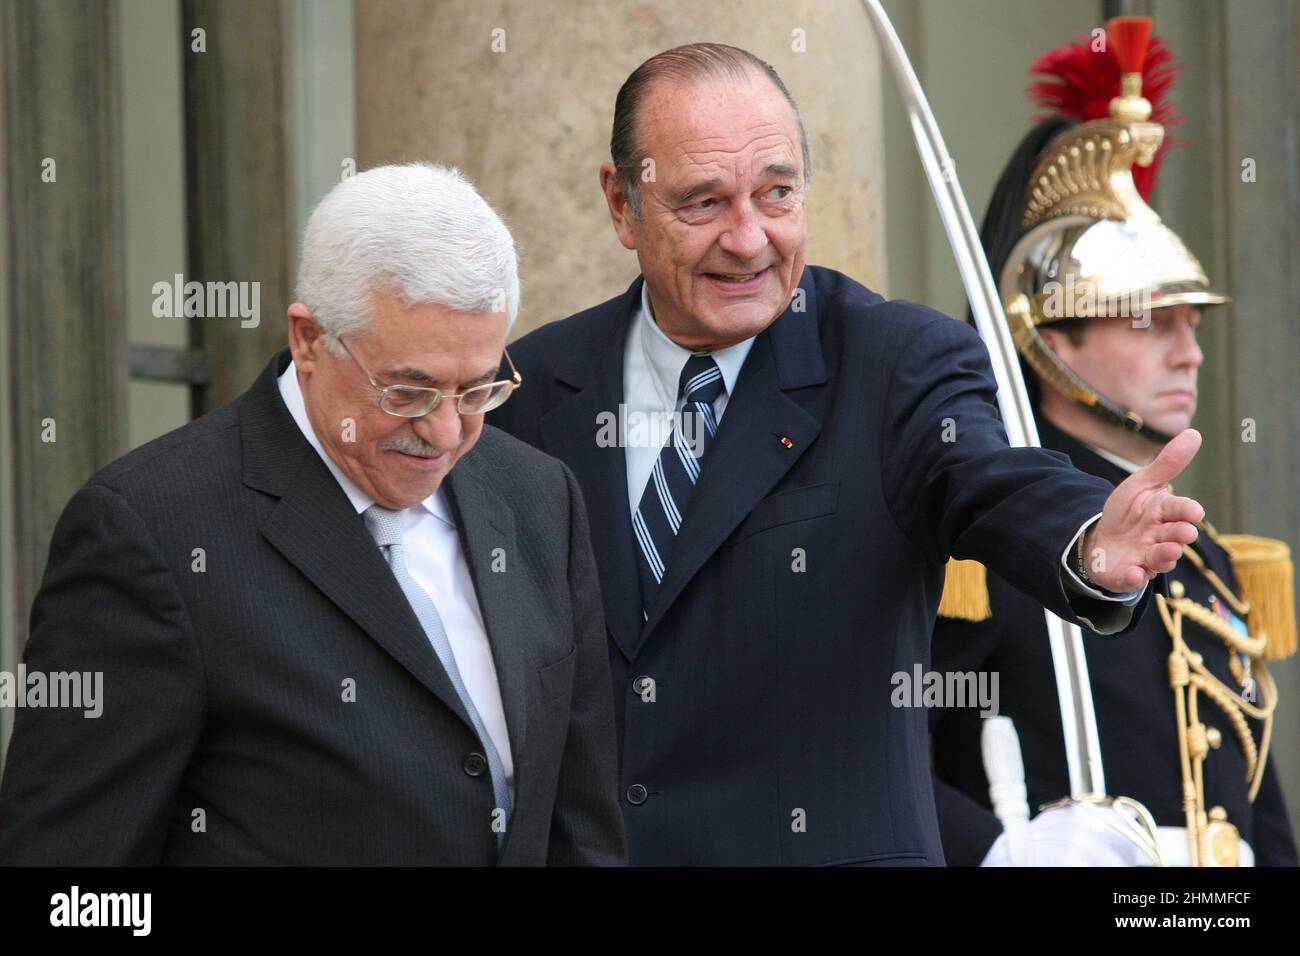 Paris (France), Elyse Palace: Mahmoud Abbas ending his official visits to several countries in Europe. The Palestinian President came to France to ask for Jacques Chirac's support and backing to reactivate the peace process between Israel and the Palestinian unity government with Hamas (2007/02/24). Stock Photo